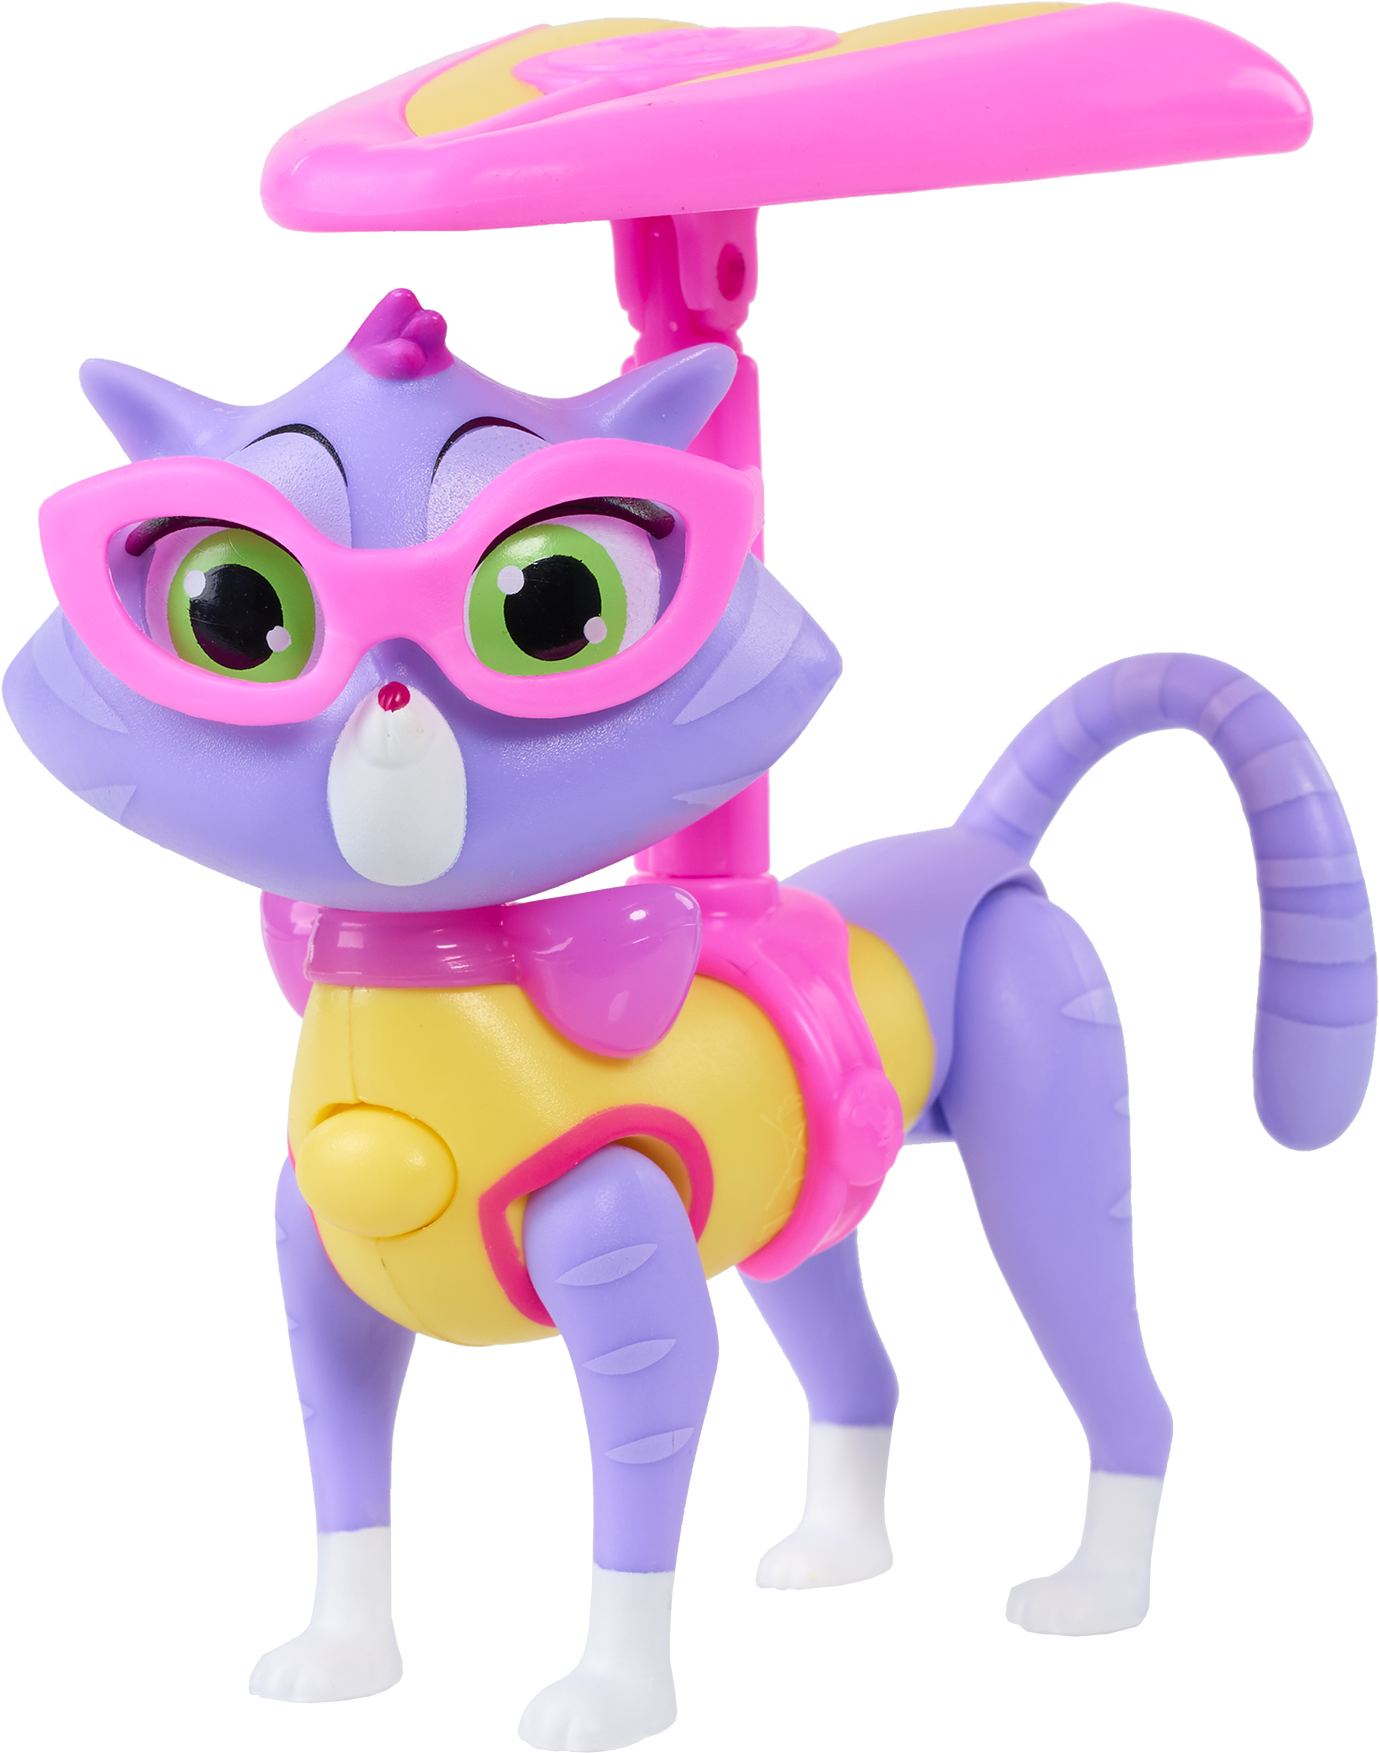 Puppy Dog Pals Hissy Figure With Helicopter Gear PNG